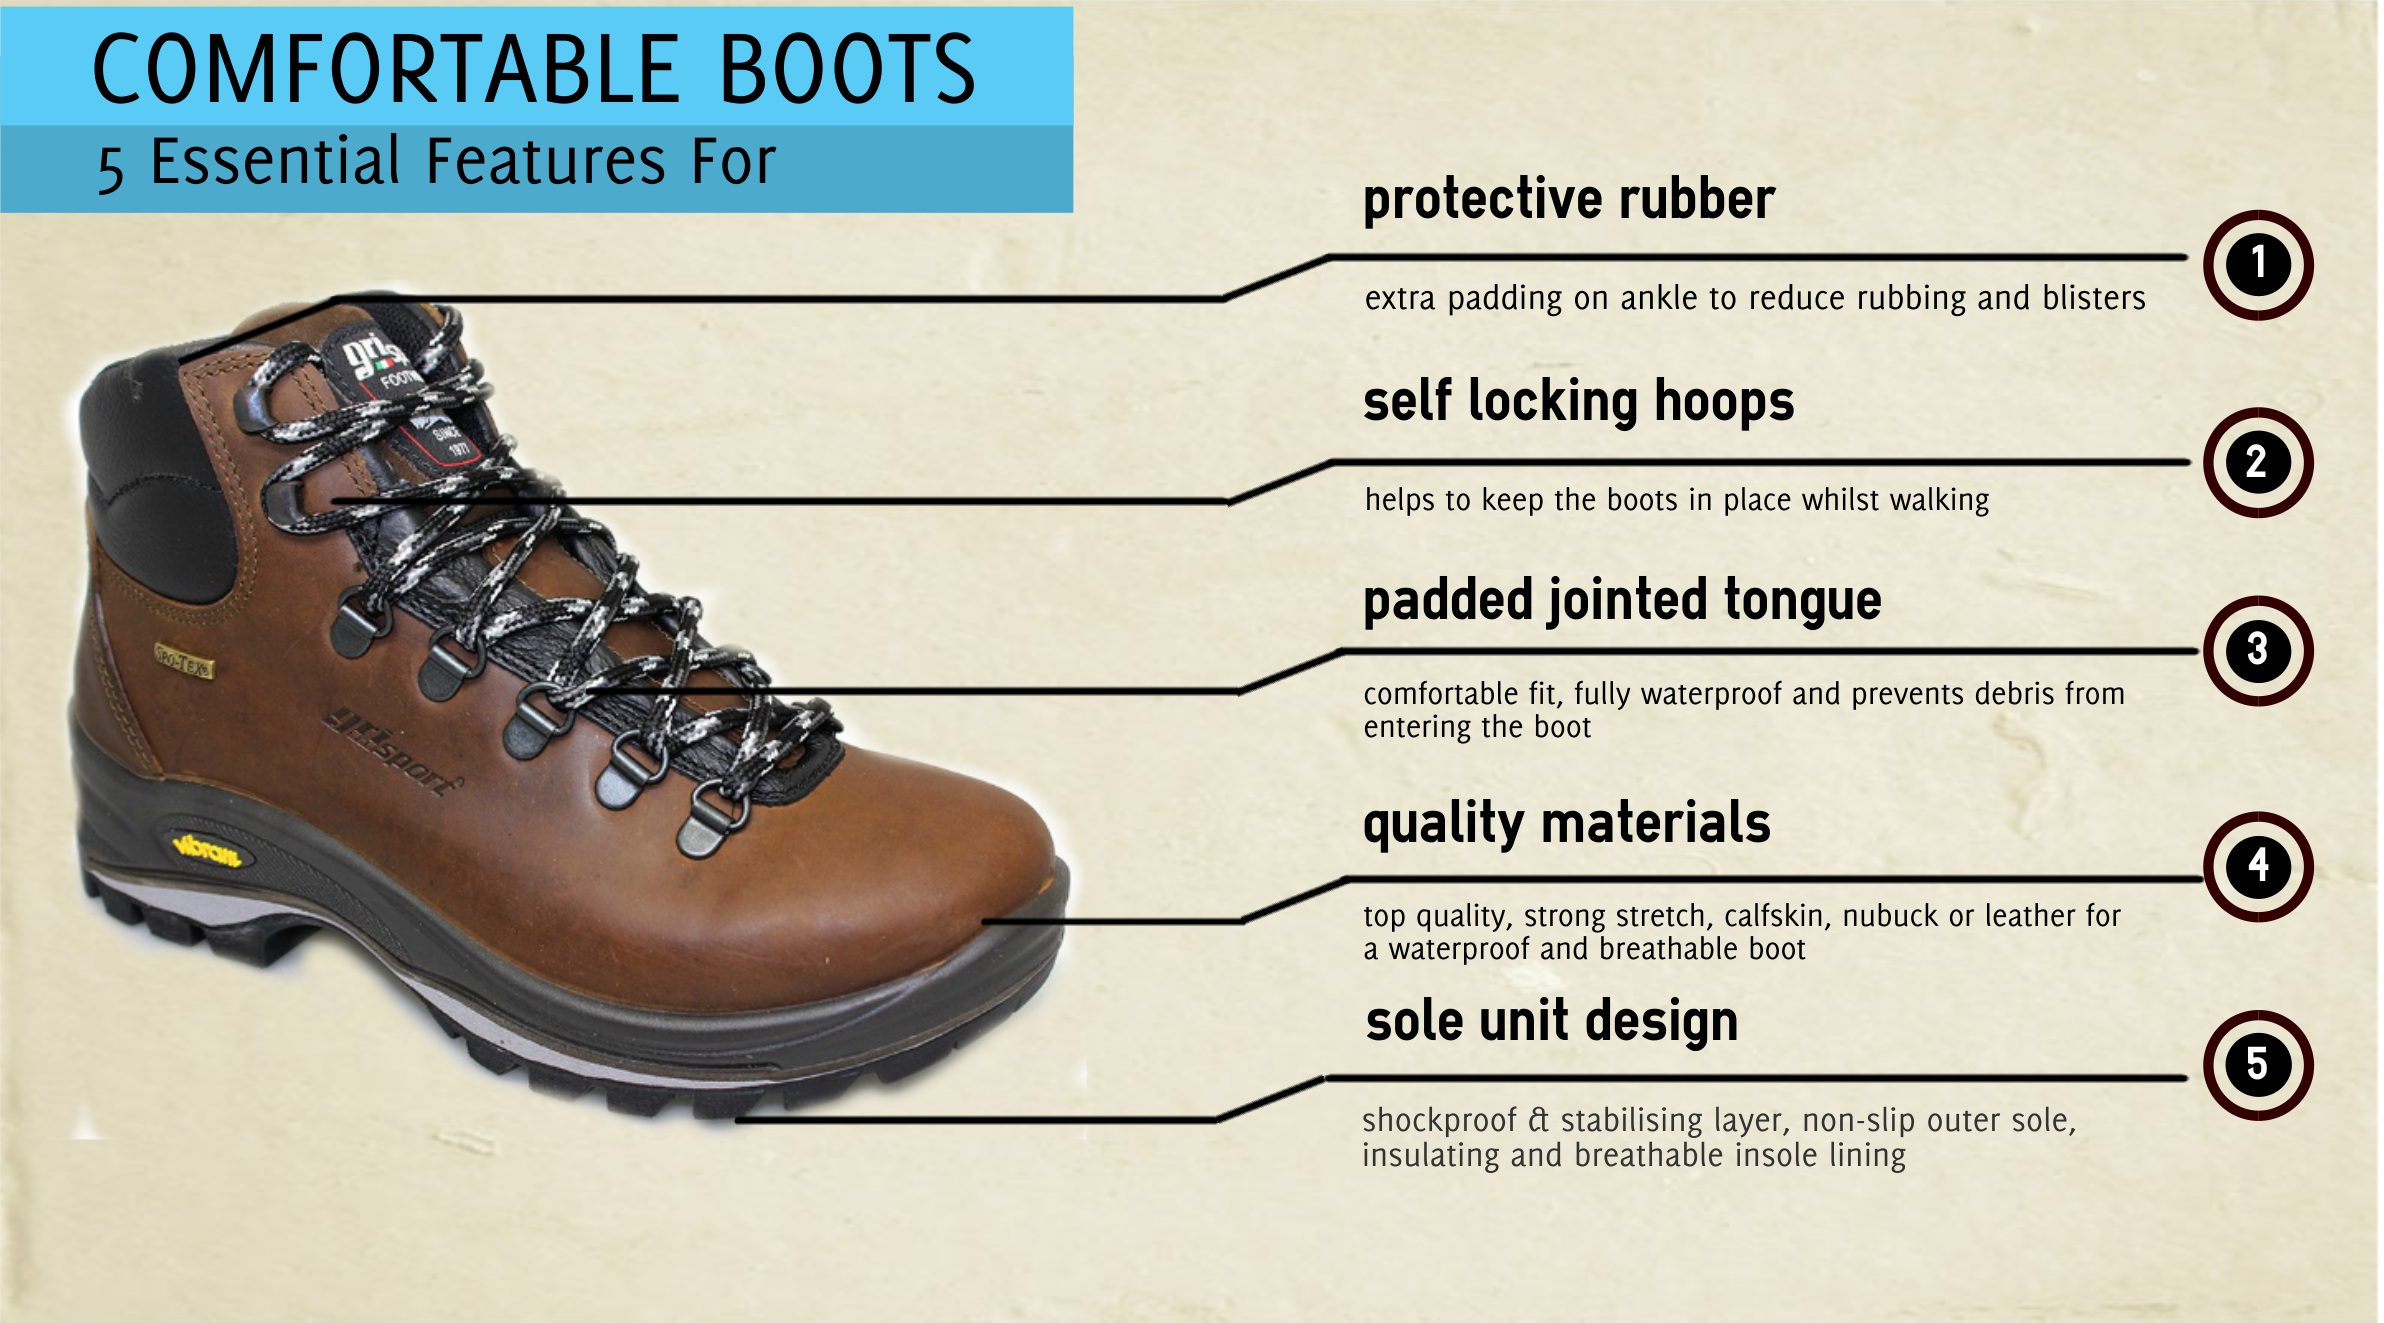 5 essential features needed for comfortable boots infographic